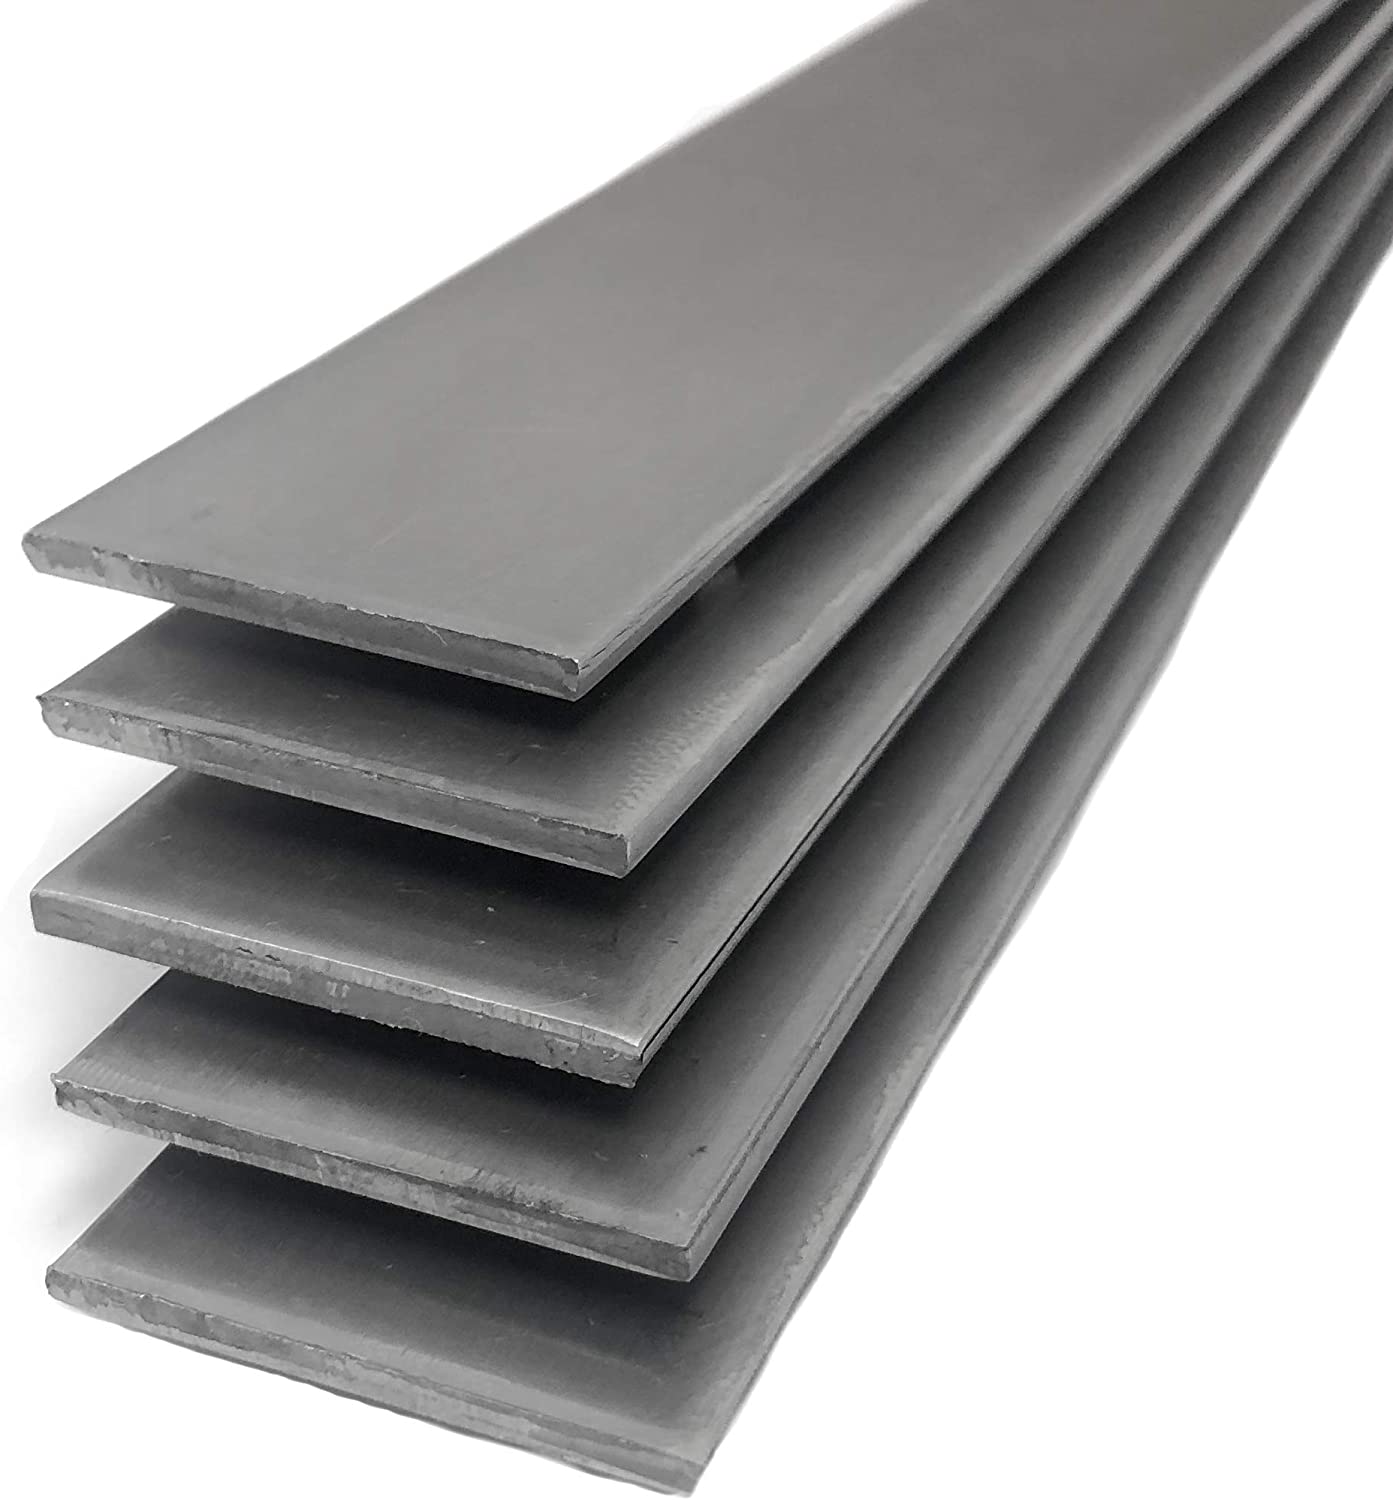 China manufacture First Grade steel flat bar Factory Fine Price